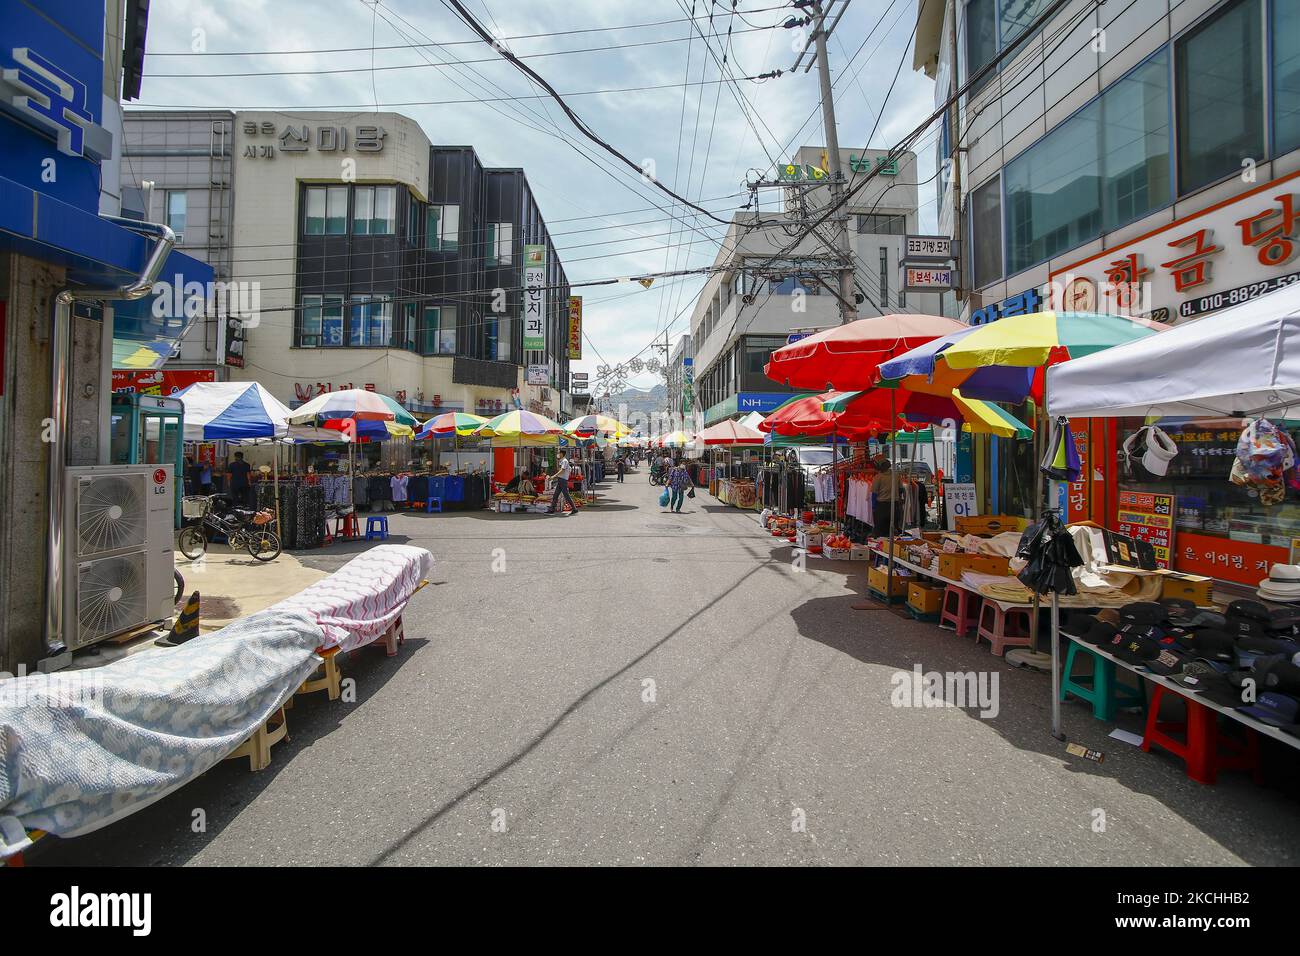 A View of empty marketplace street at Geumbit market in Geumsan Gun, South Korea on July 22, 2021. South Korea's daily new coronavirus cases hit a fresh high of over 1,800 on Thursday with mass infections from a virus-hit naval unit, while authorities are increasingly inclined to extend the toughest virus restrictions in the wider Seoul area amid no signs of a letup. (Photo by Seung-il Ryu/NurPhoto) Stock Photo